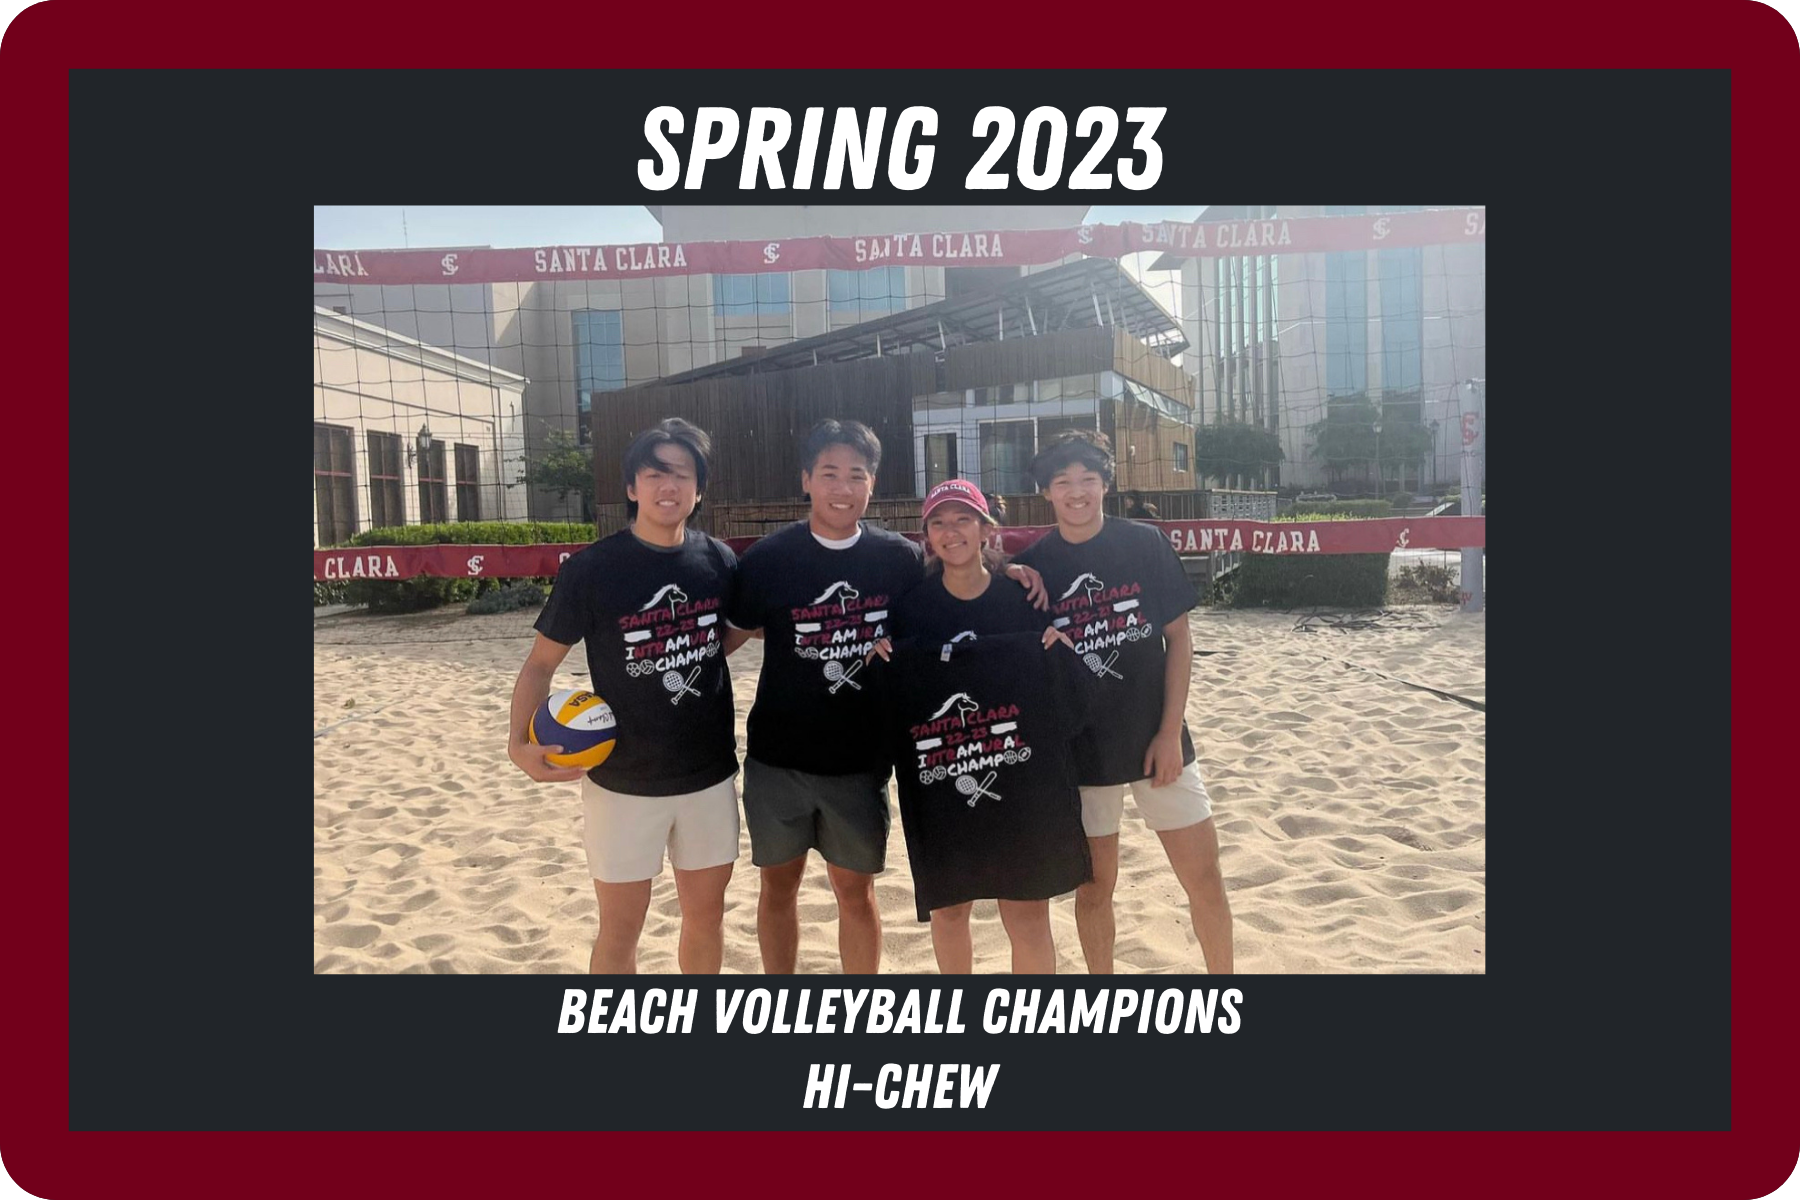 Photo of our IM Beach Volleyball Champs, Hi-Chew posing with their IM Champ T shirts